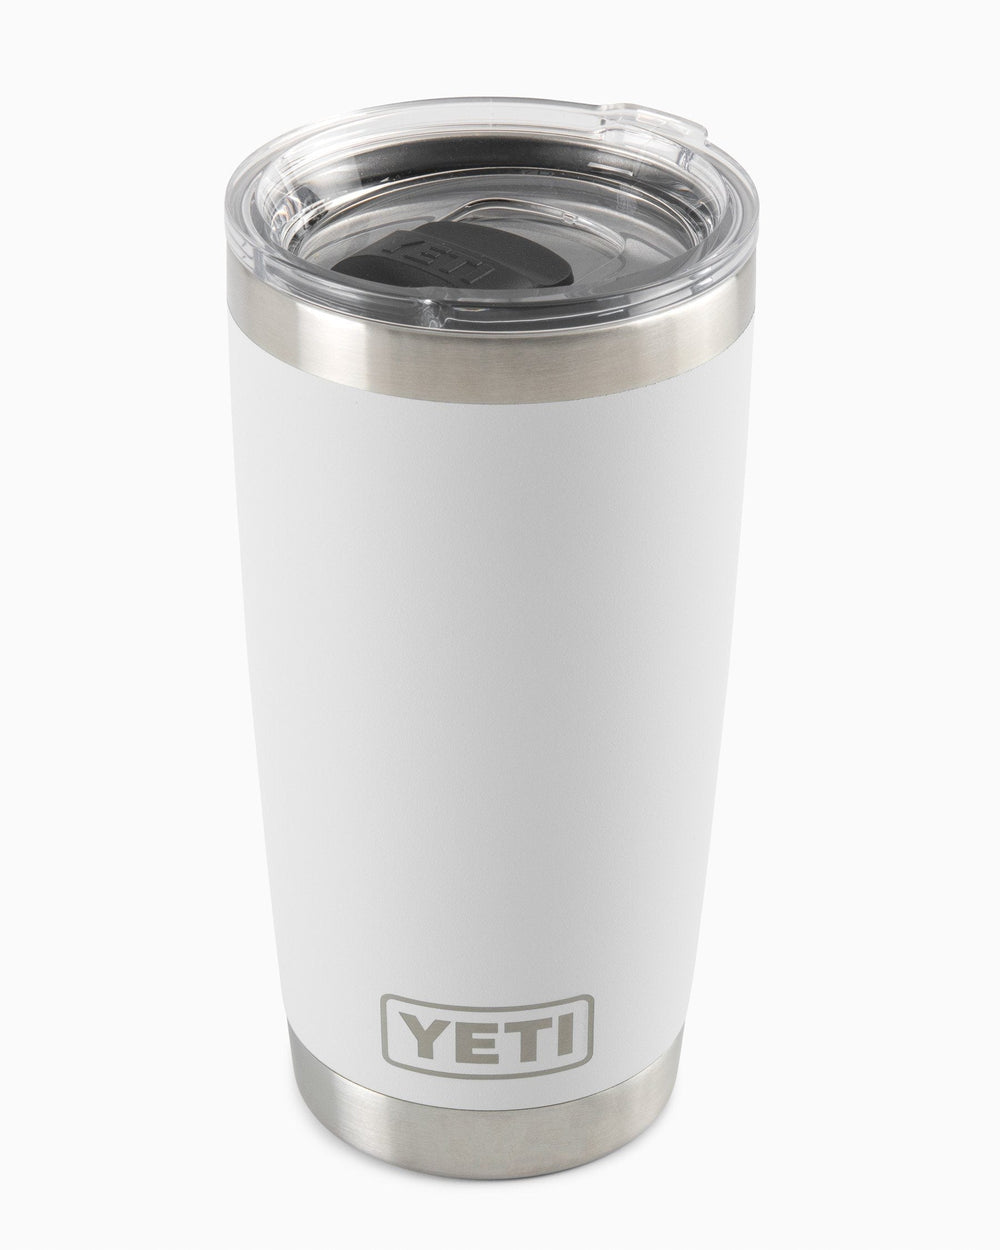 Snag a Yeti Rambler on sale for less than $20